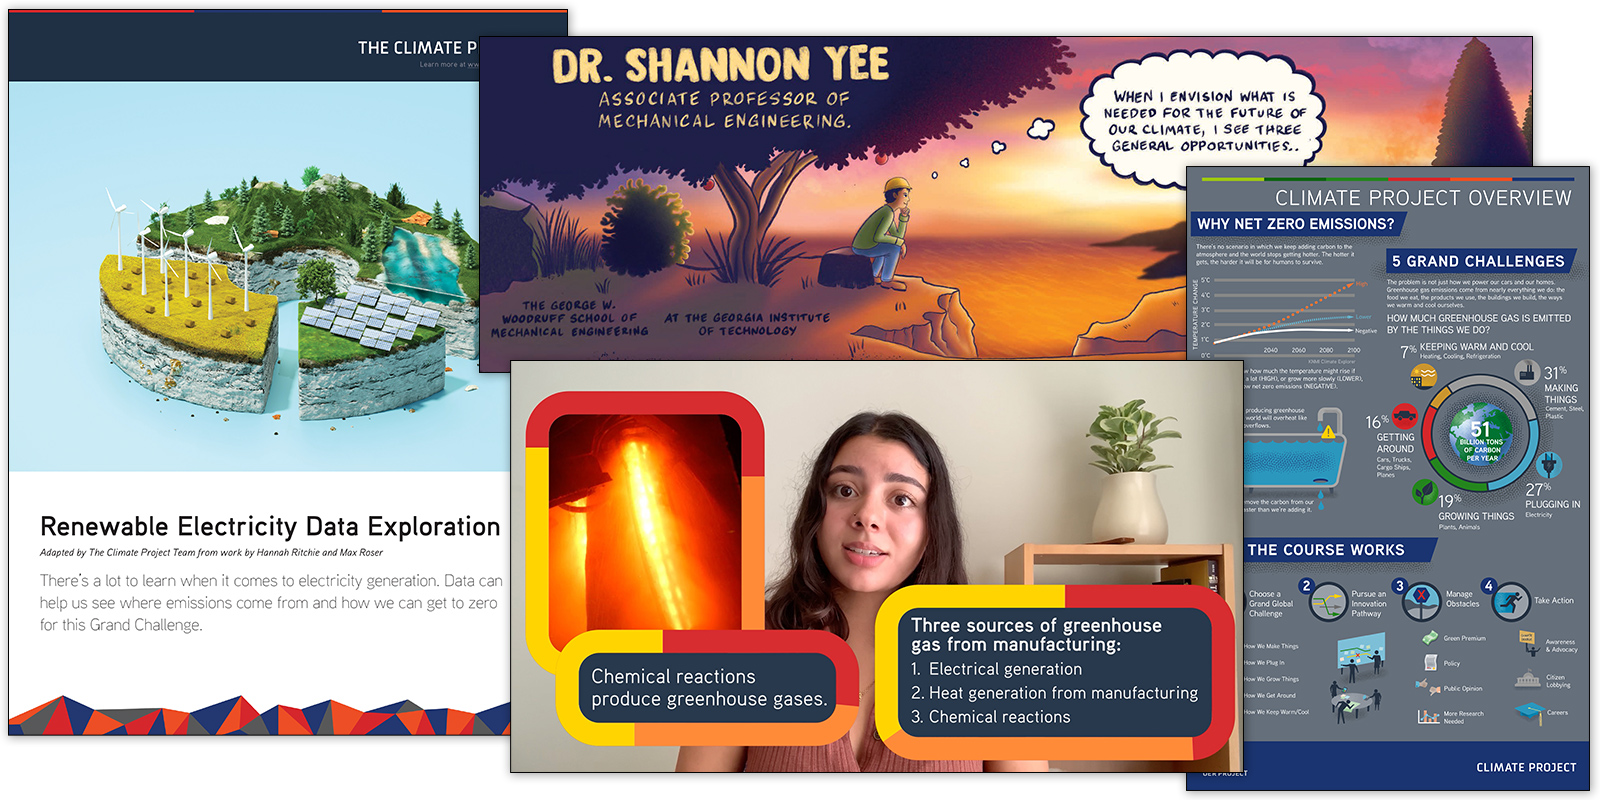 A collage of small images from the new course, including an infographic, a female presenter, and an illustration of a woman watching the sunset.